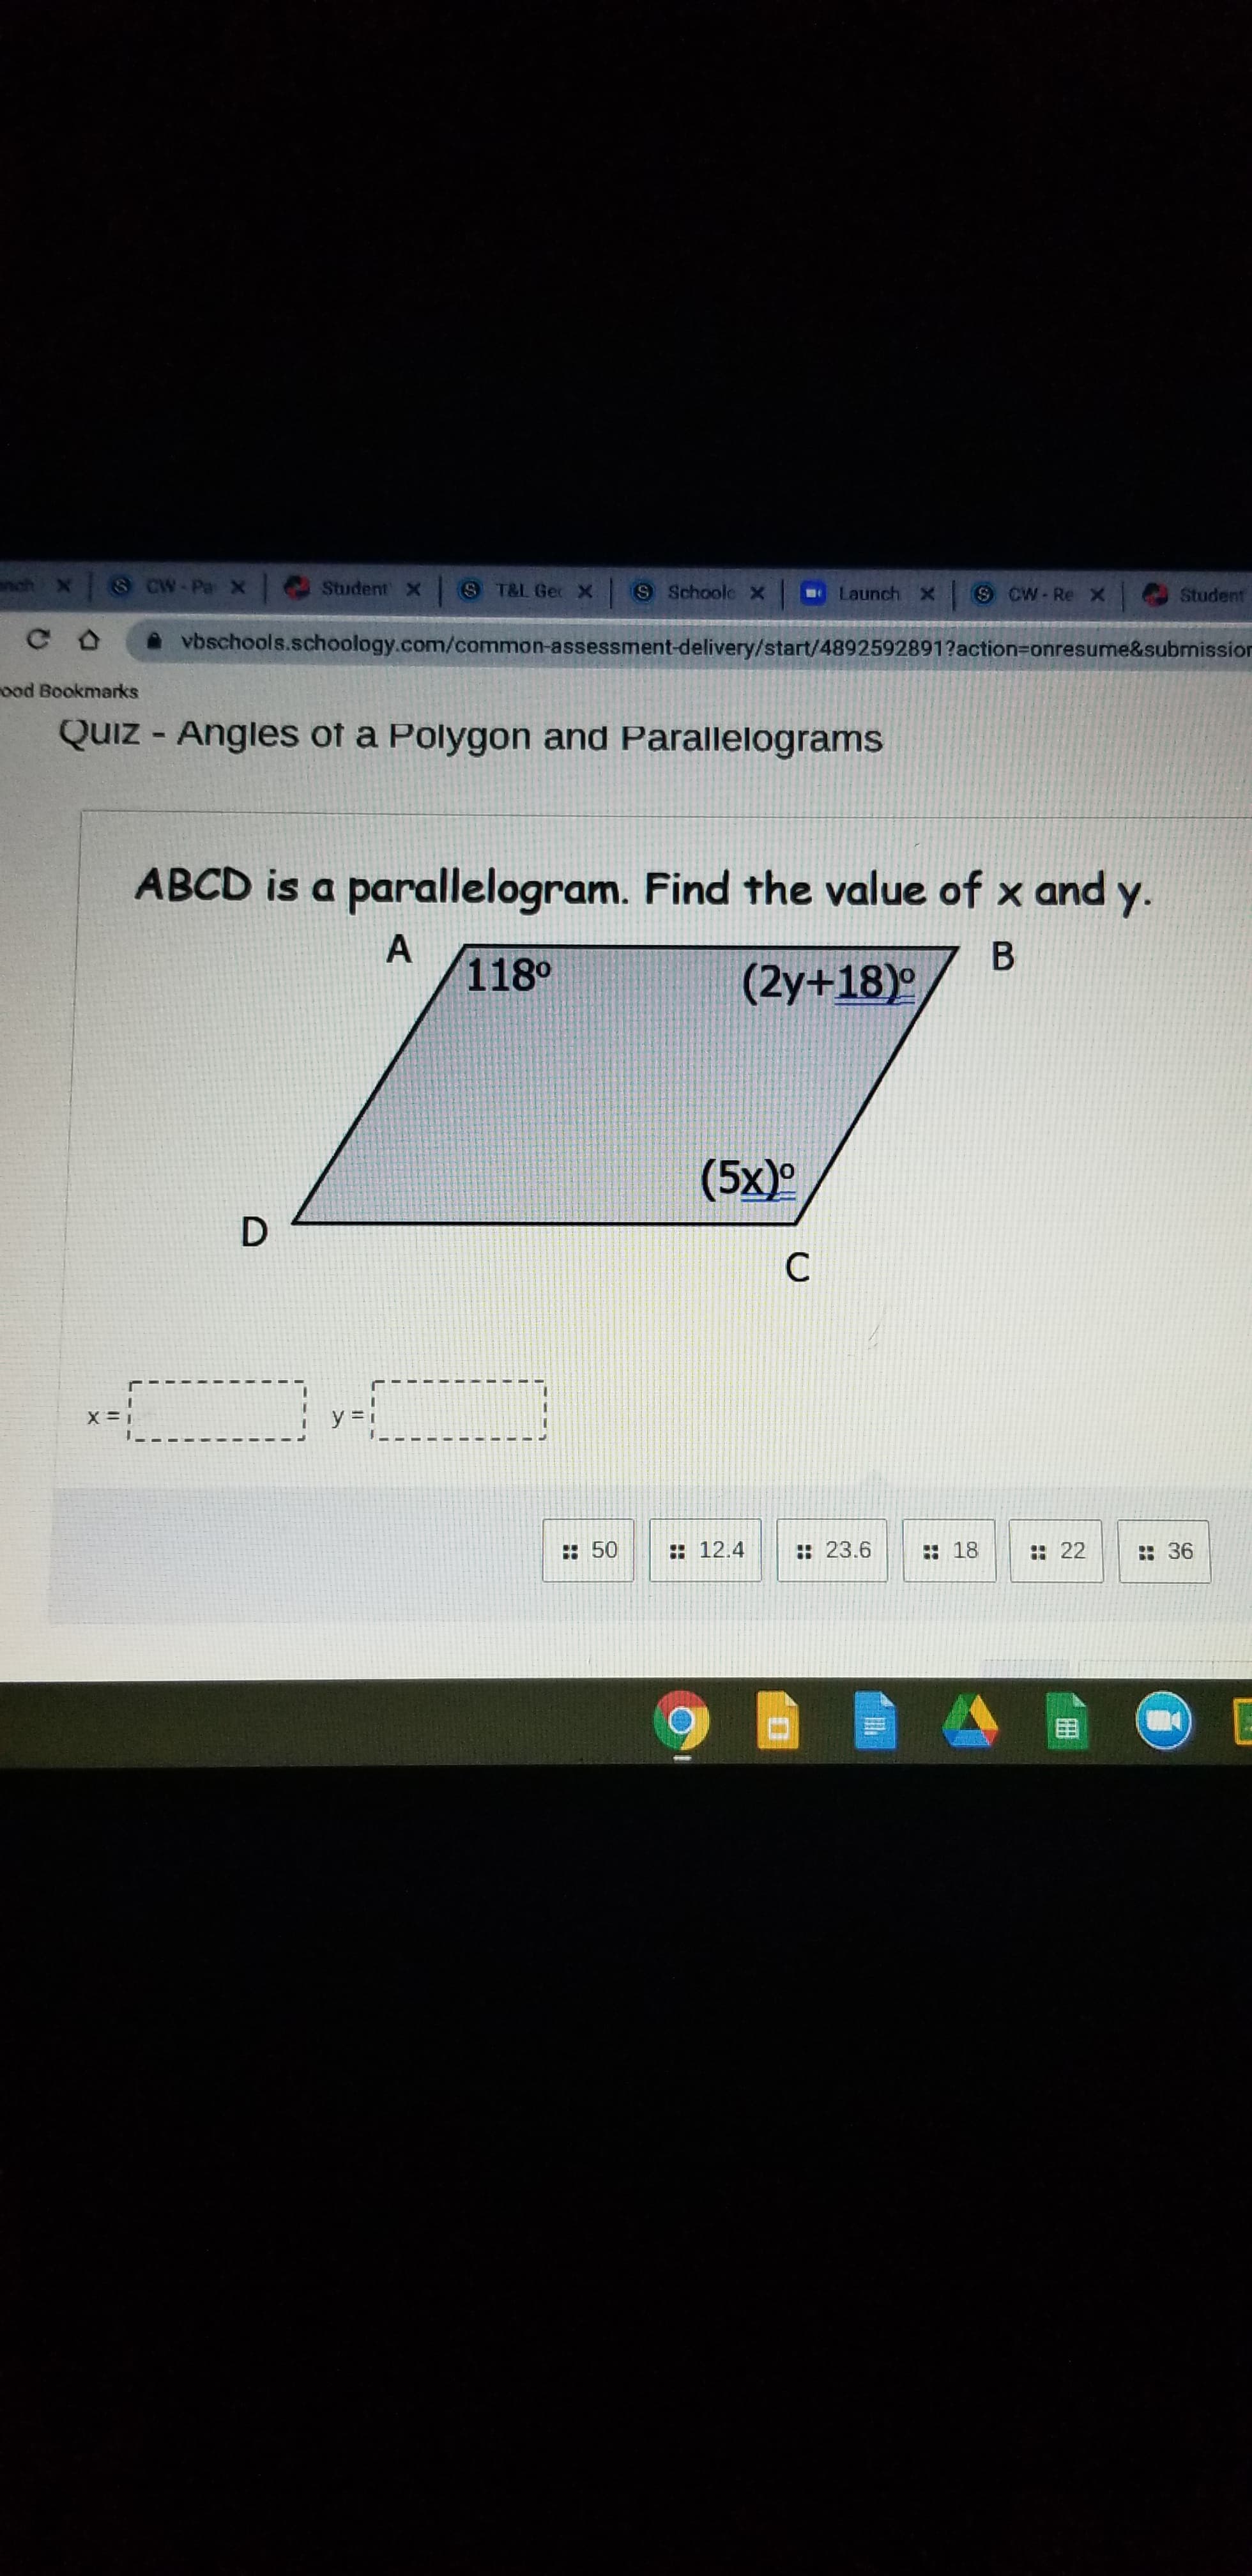 ABCD is a parallelogram. Find the value of x and y.
A
118°
(2у+18)°
(5x)°
C
